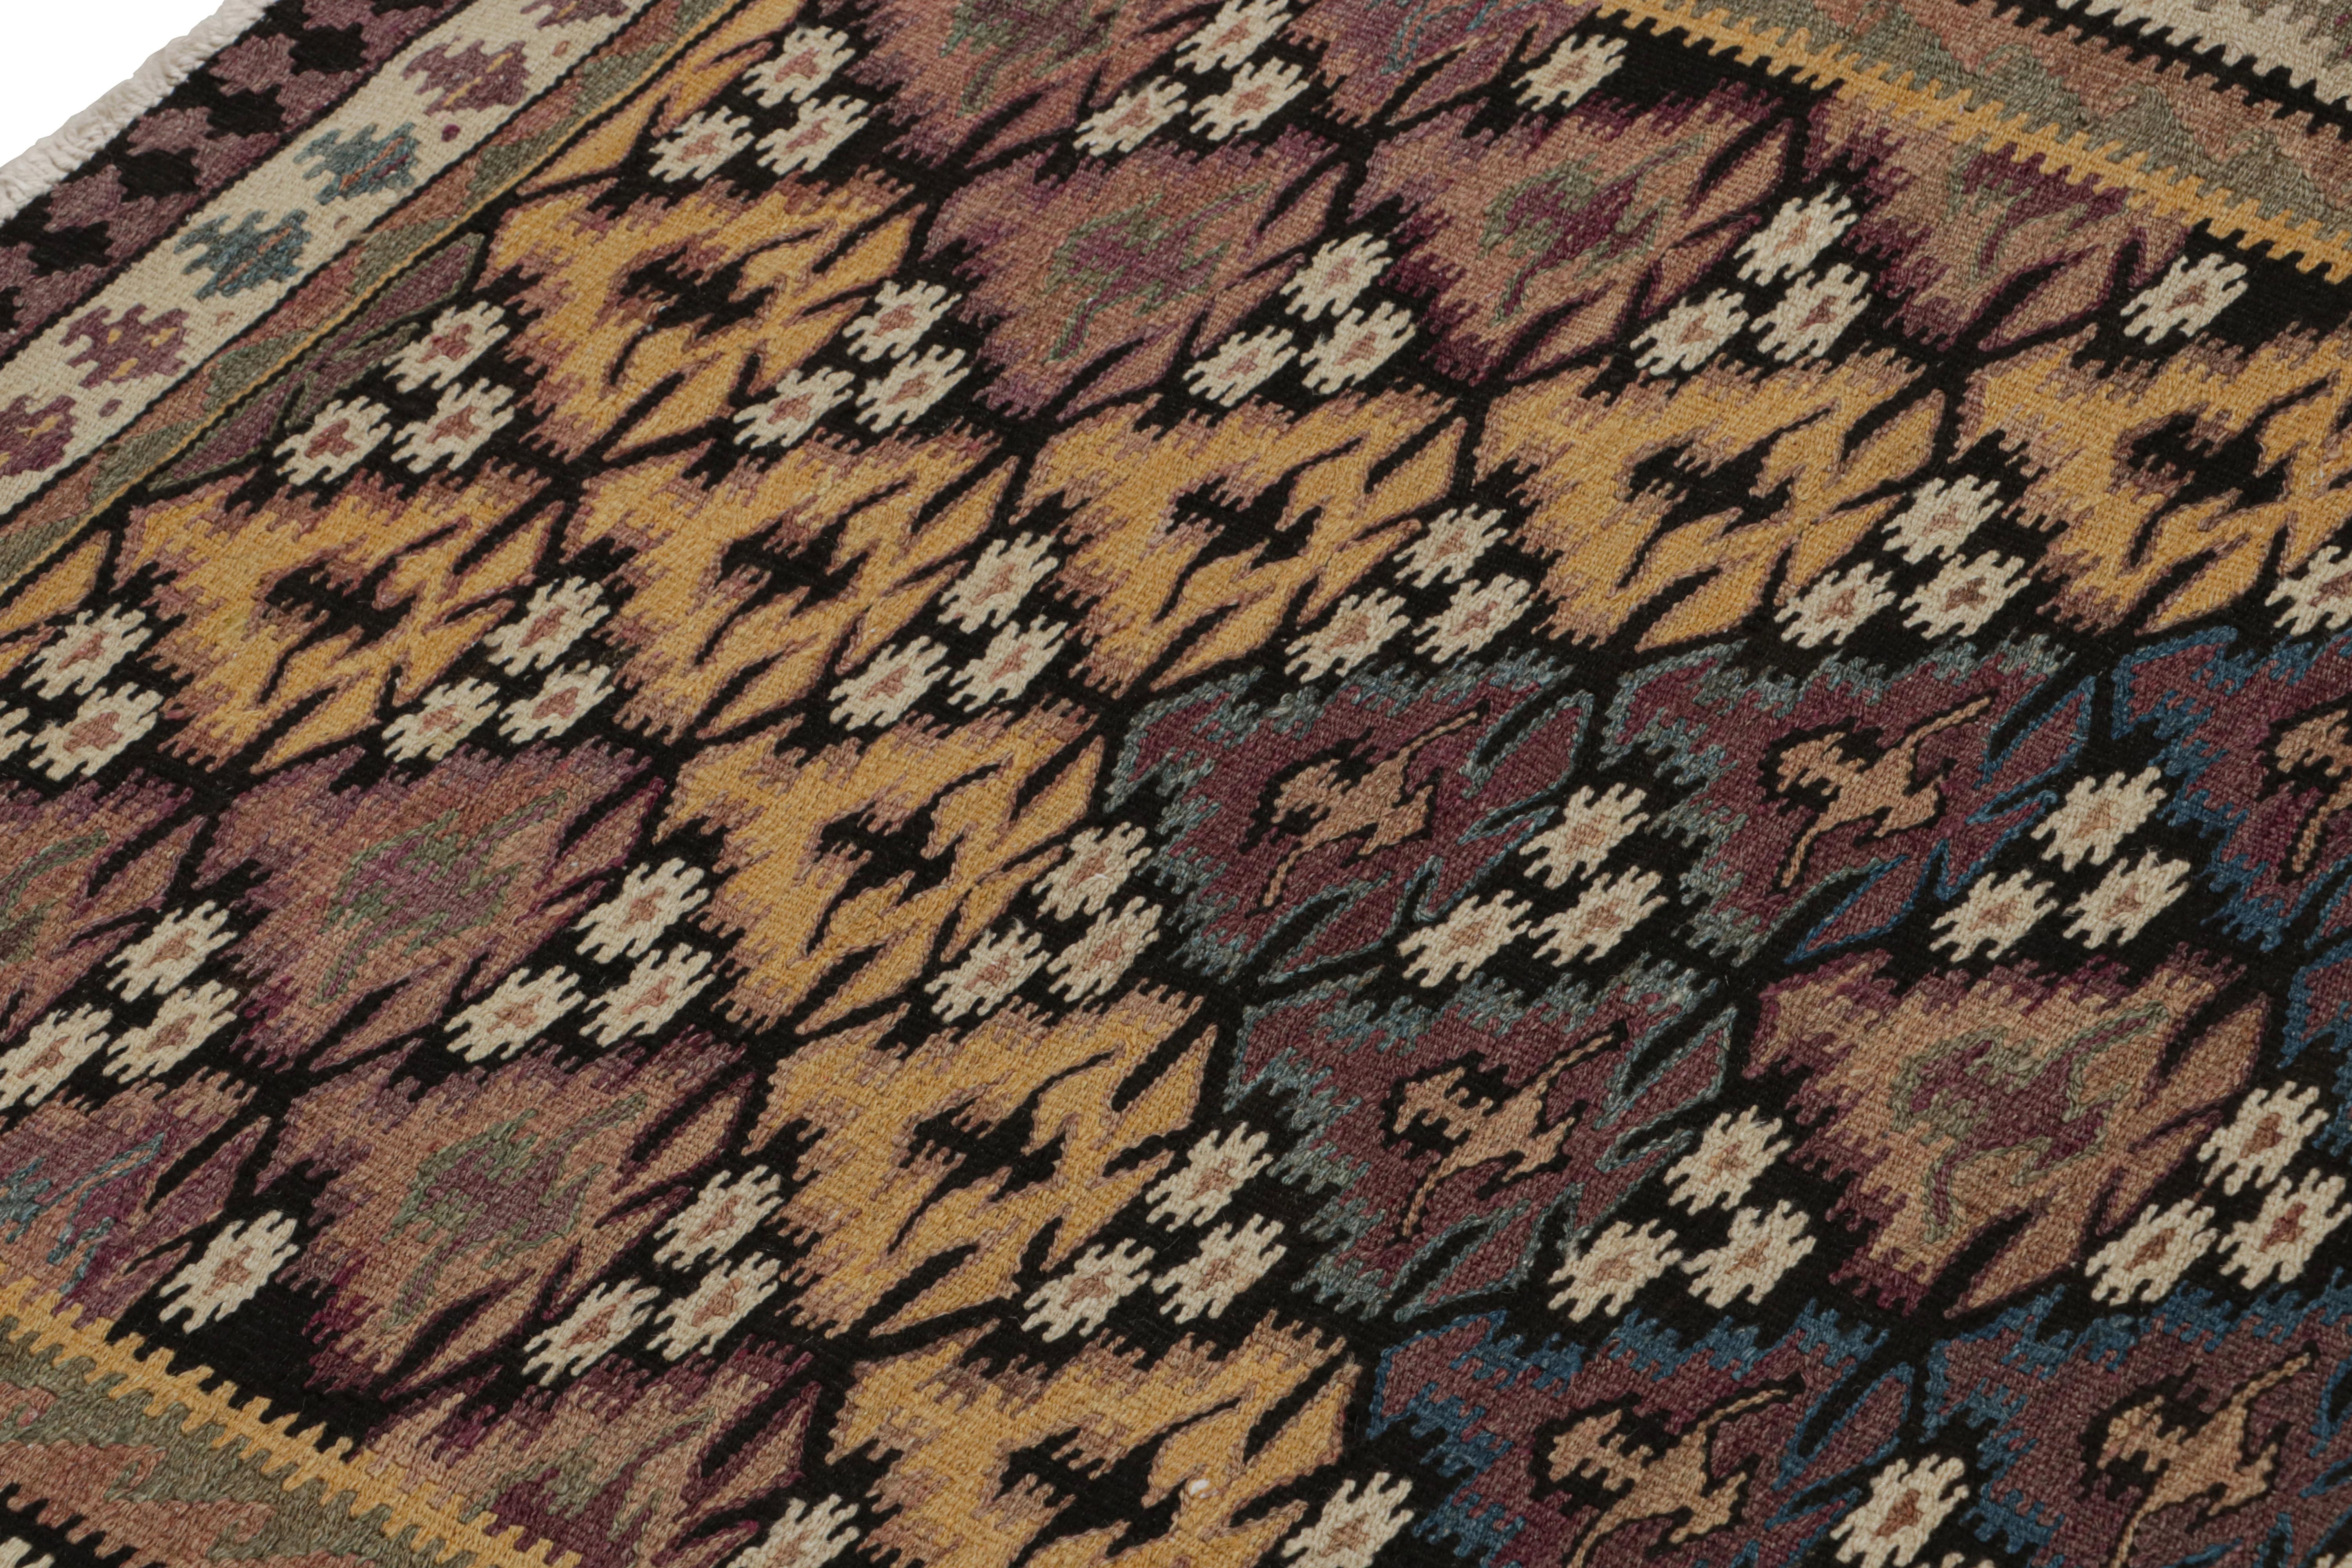 Hand-Woven Vintage Persian Kilim in Polychromatic Geometric Patterns, from Rug & Kilim For Sale